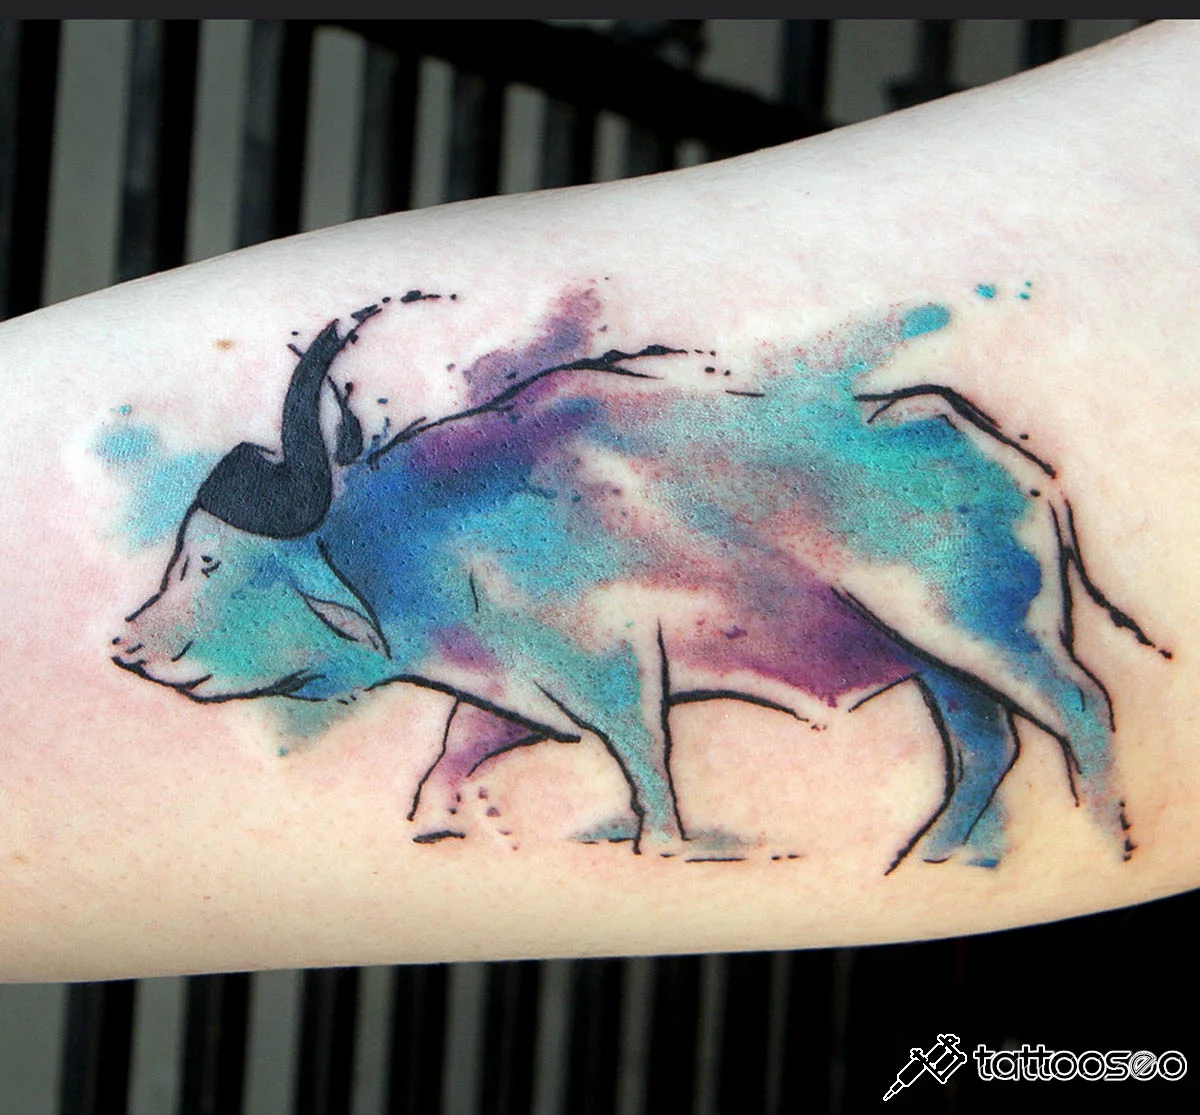 Bison tattoo meaning